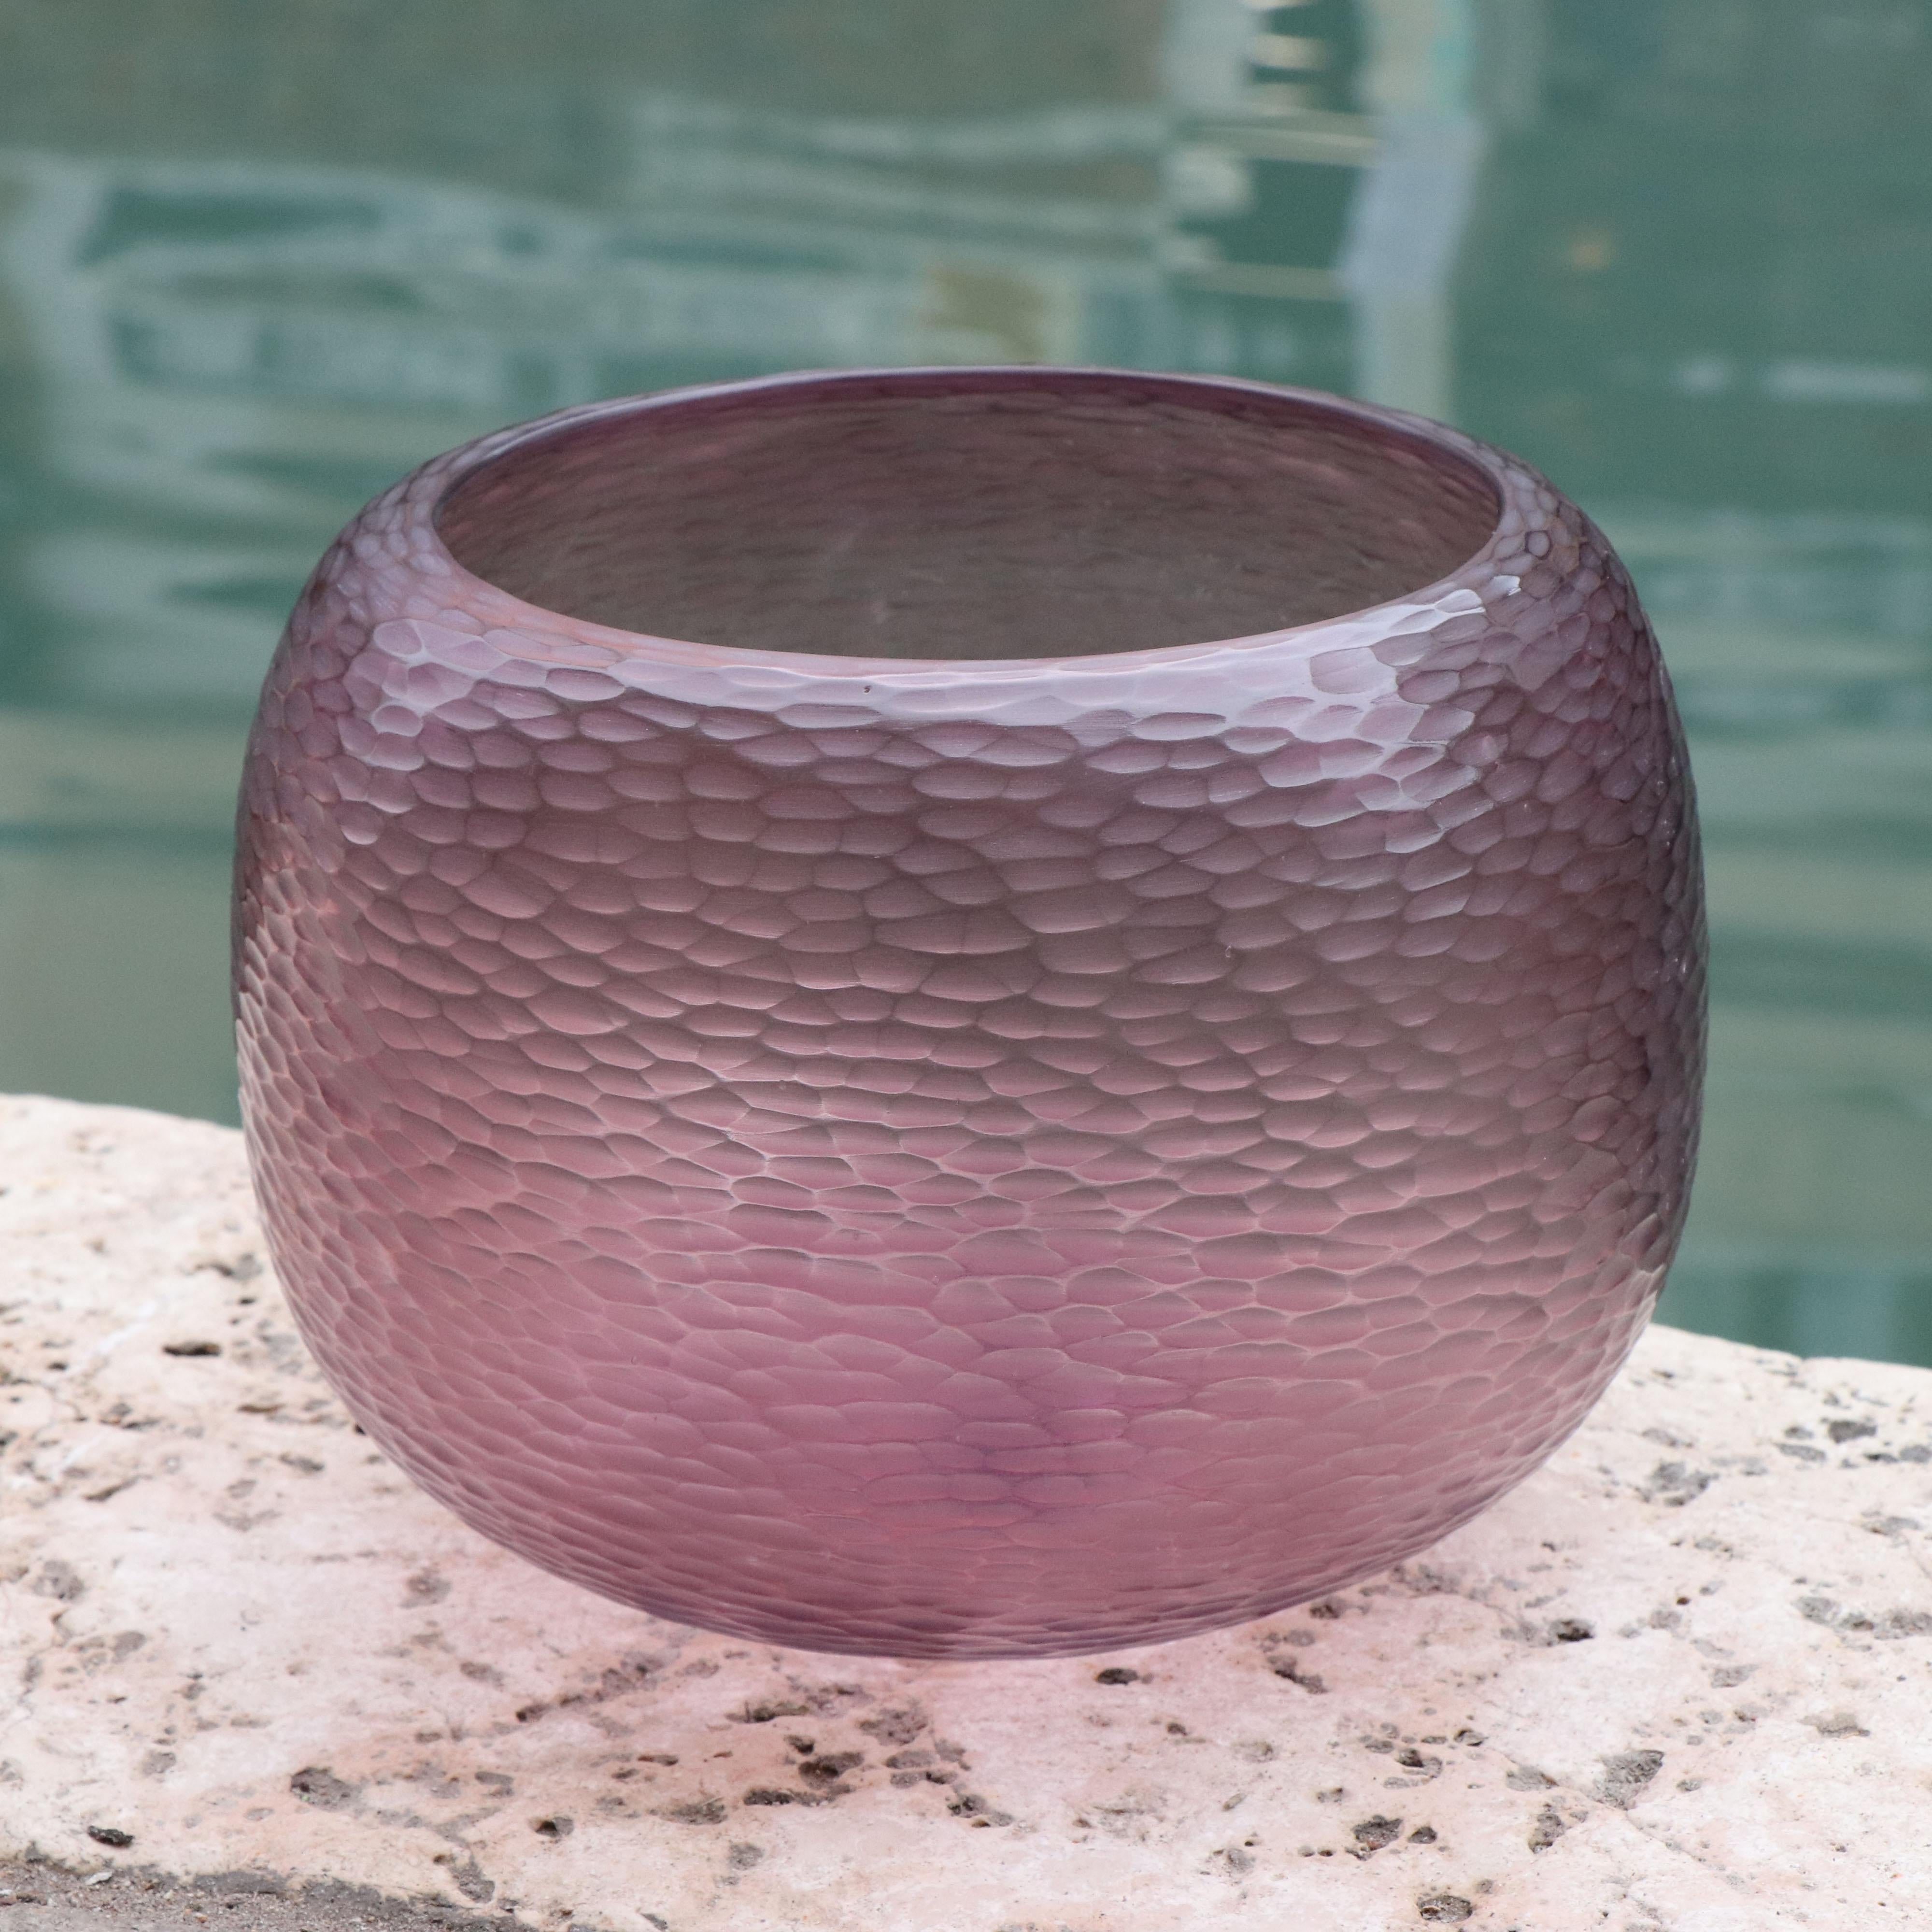 Playfully named Puffo this vase has a round ‘pouf-like’ shape. To achieve the desired form and dimensions the molten glass is first mouthblown. Once cooled the surface is transformed by a laborious cold carving process called ‘molatura’ lending the